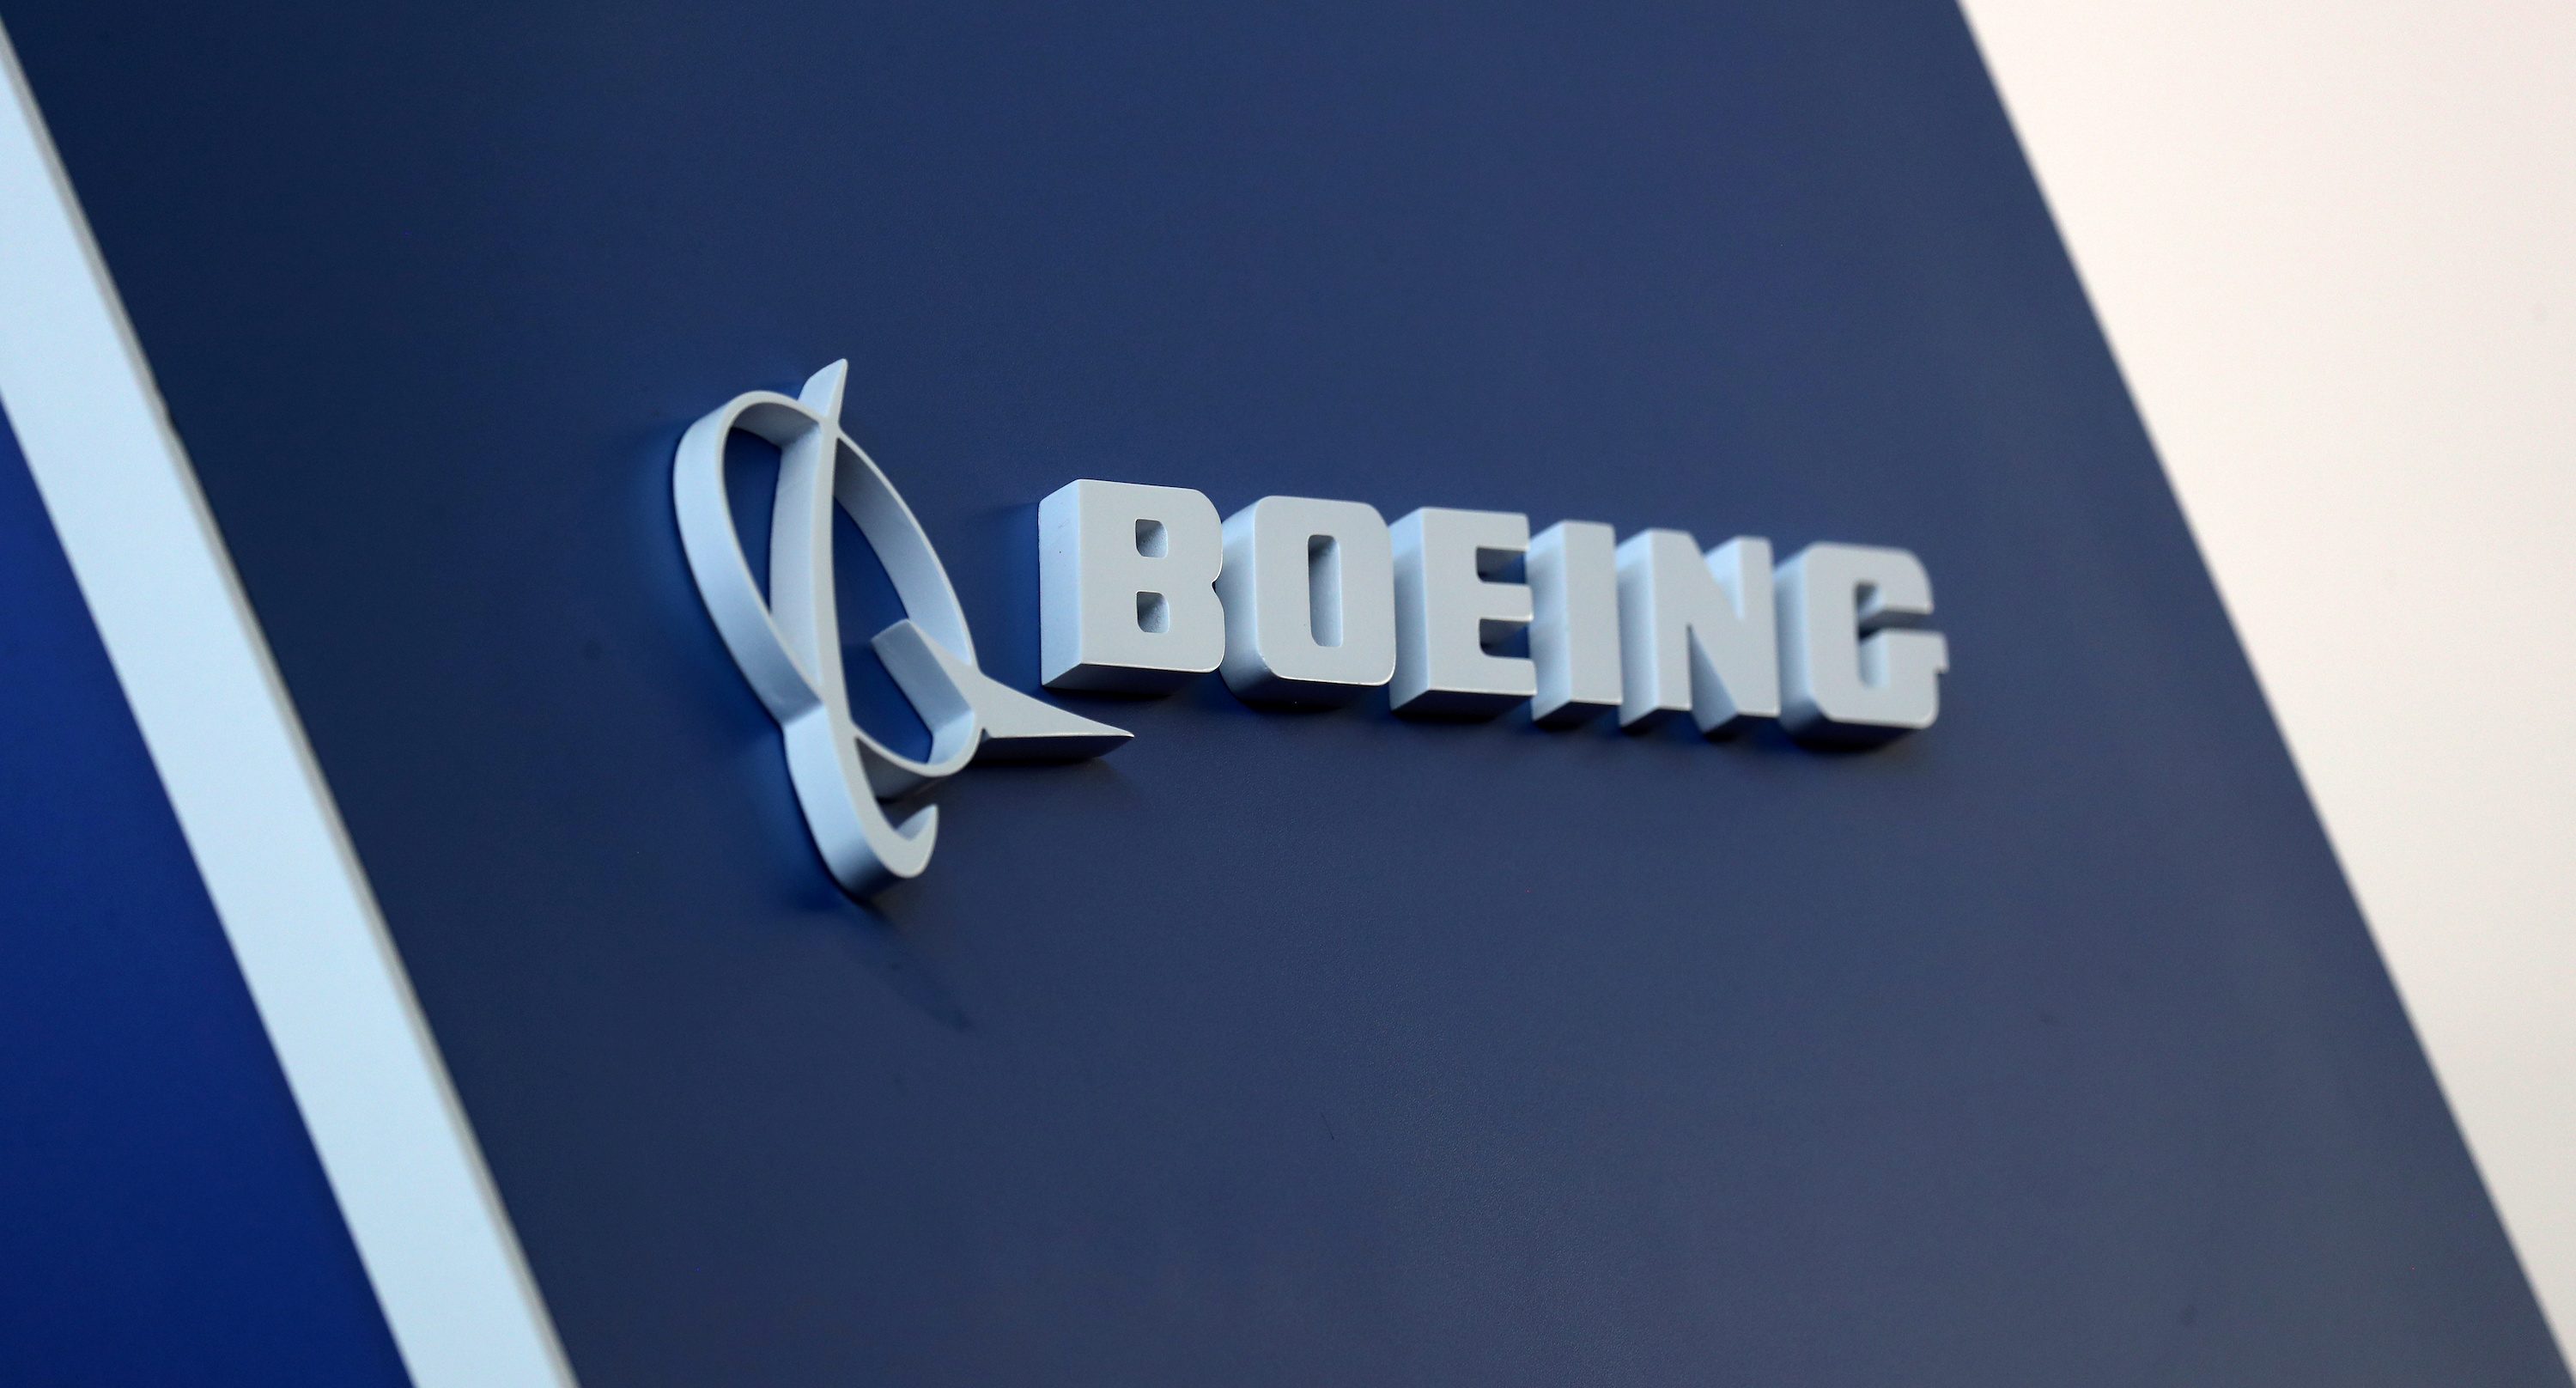 Boeing lifts China jet demand estimate over 2 decades to $1.47 trillion